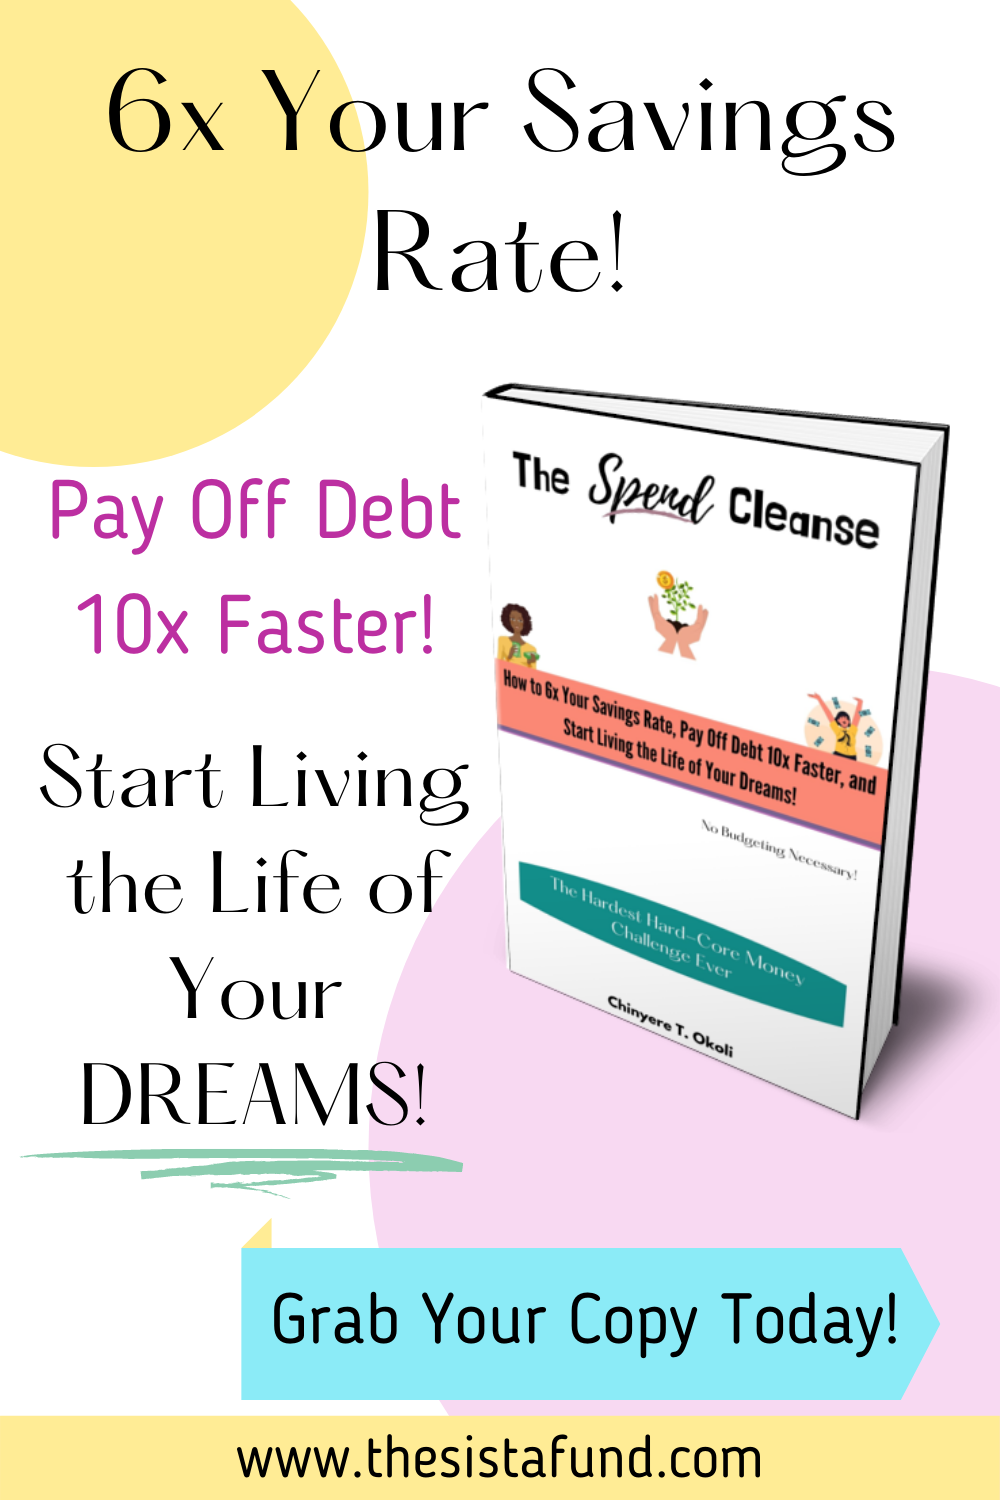 6x savings rate, pay off debt 10x faster